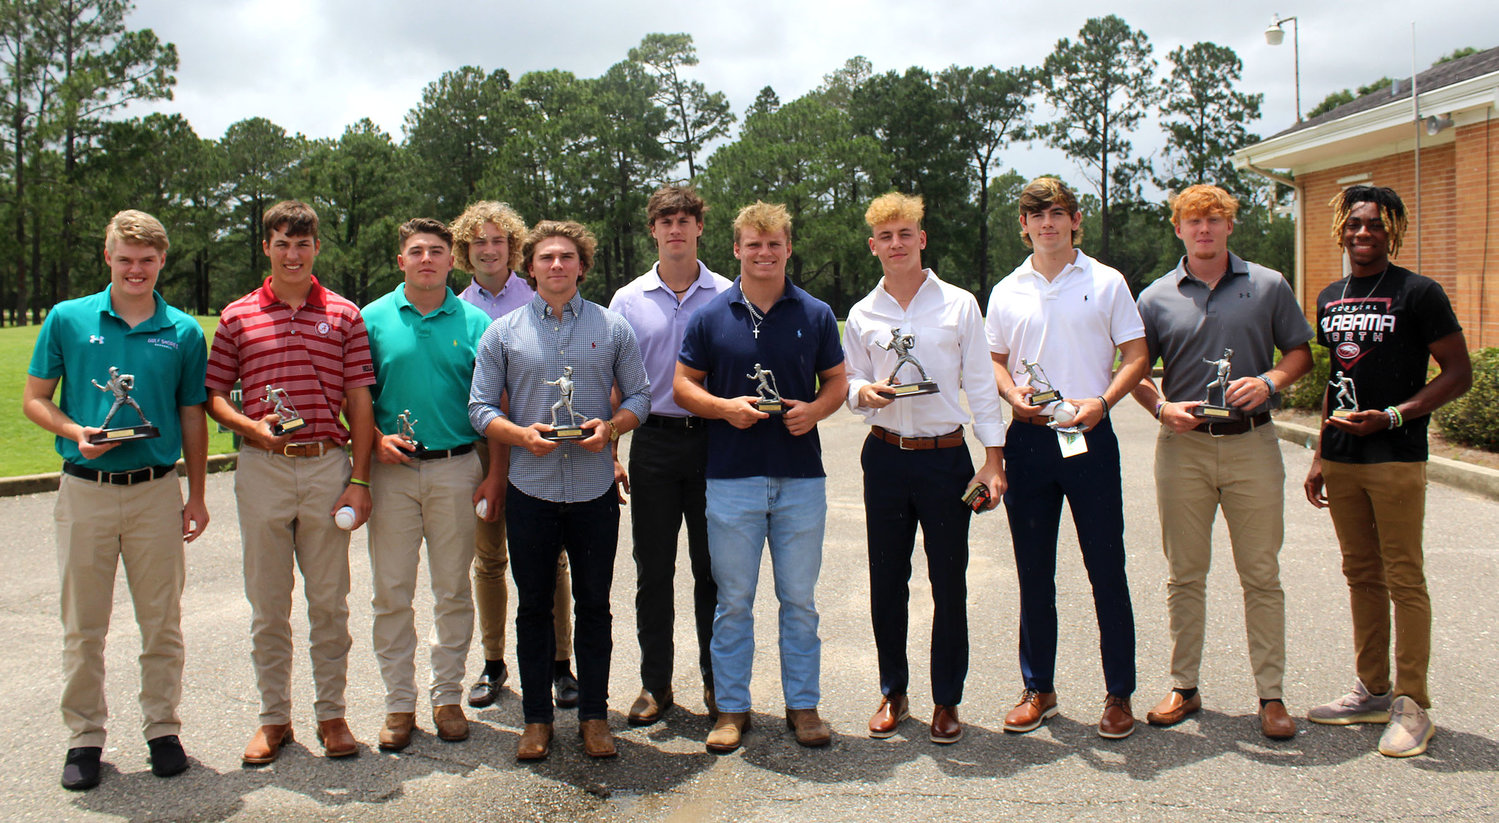 Midtown Optimist Club’s Terrific Twelve were recognized at an awards luncheon at the Azalea City Golf Course May 25. Pictured from the left are Case Hager, Matthew Milner, C.T. Englebert, Kobe Wiggins, Zane Stokes, Charlie Keller, Grant Jay, Camden Diamond, Kyle Hipp, Jackson Howard and Brandon Cain. Not pictured is Breyton Cornelius.